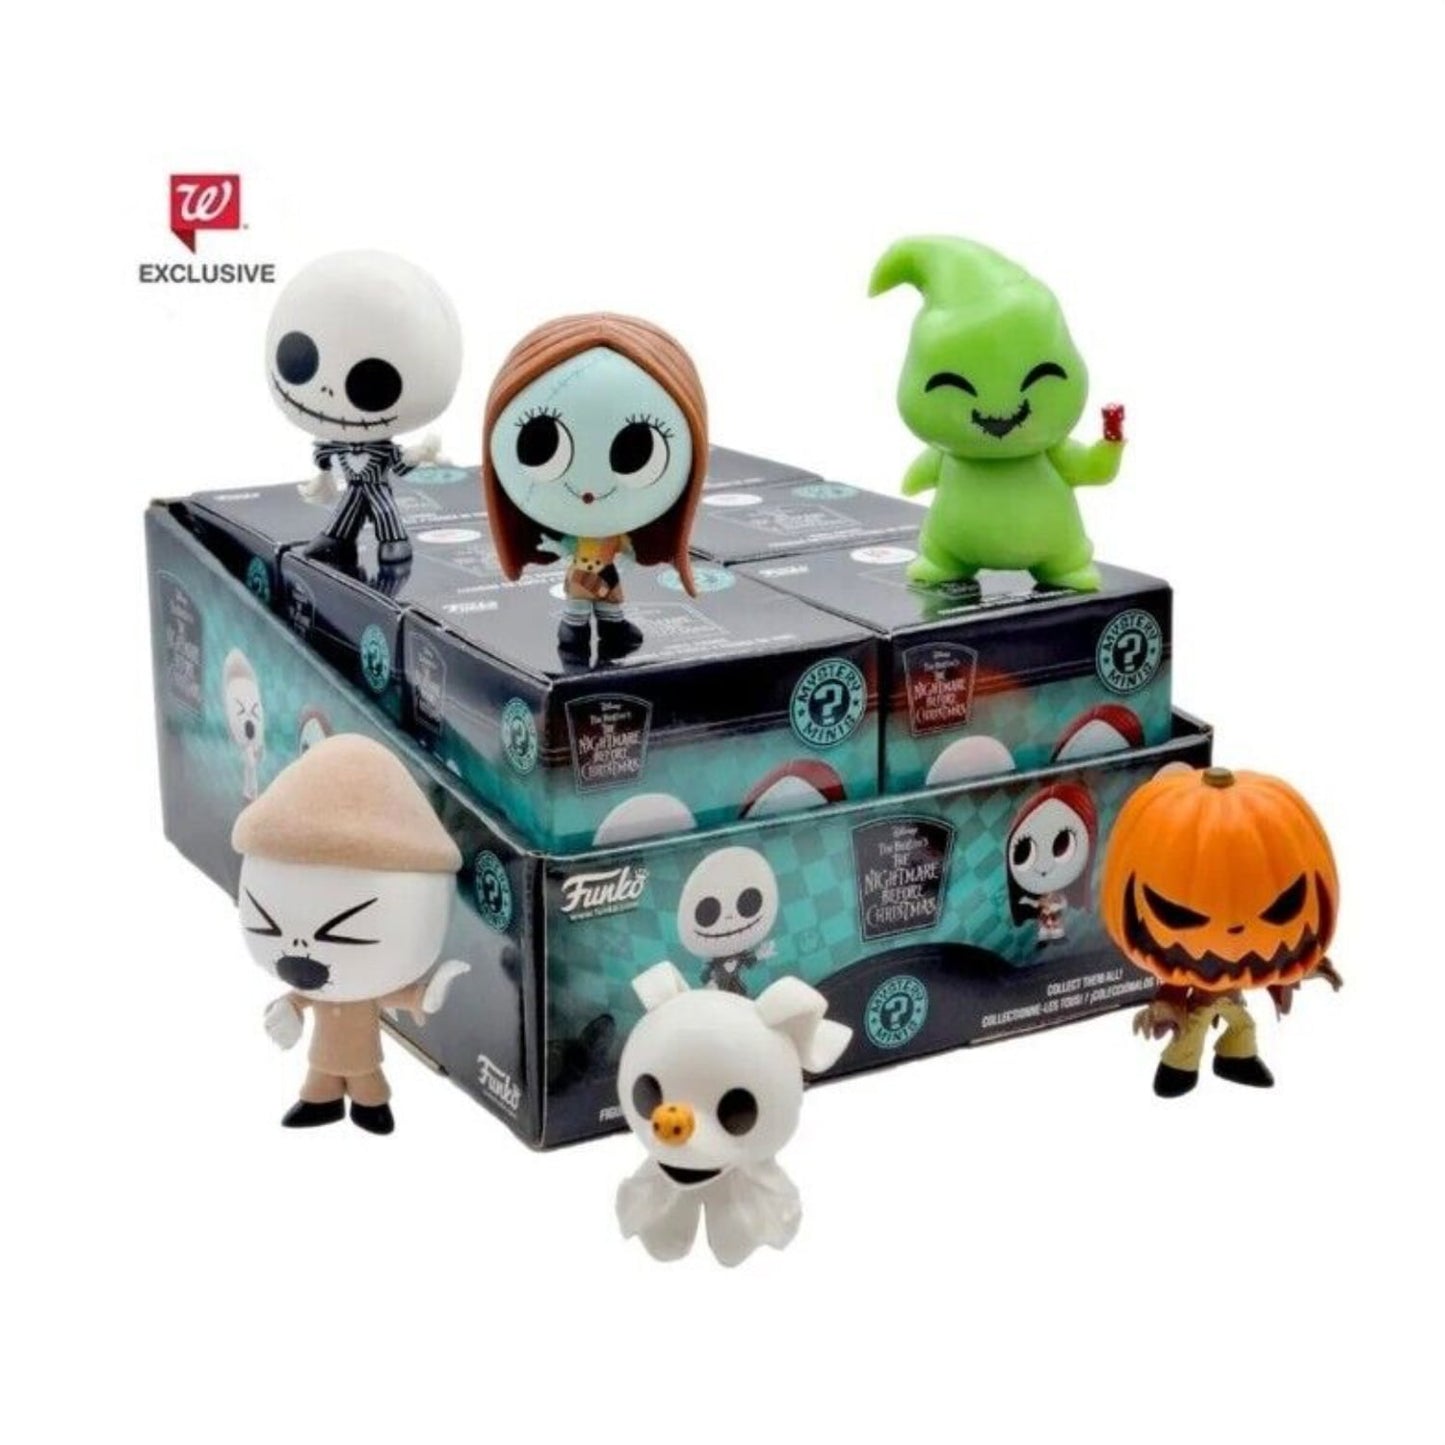 Funko Mystery Minis Disney Nightmare Before Christmas Walgreens Exclusive Full Set of 6